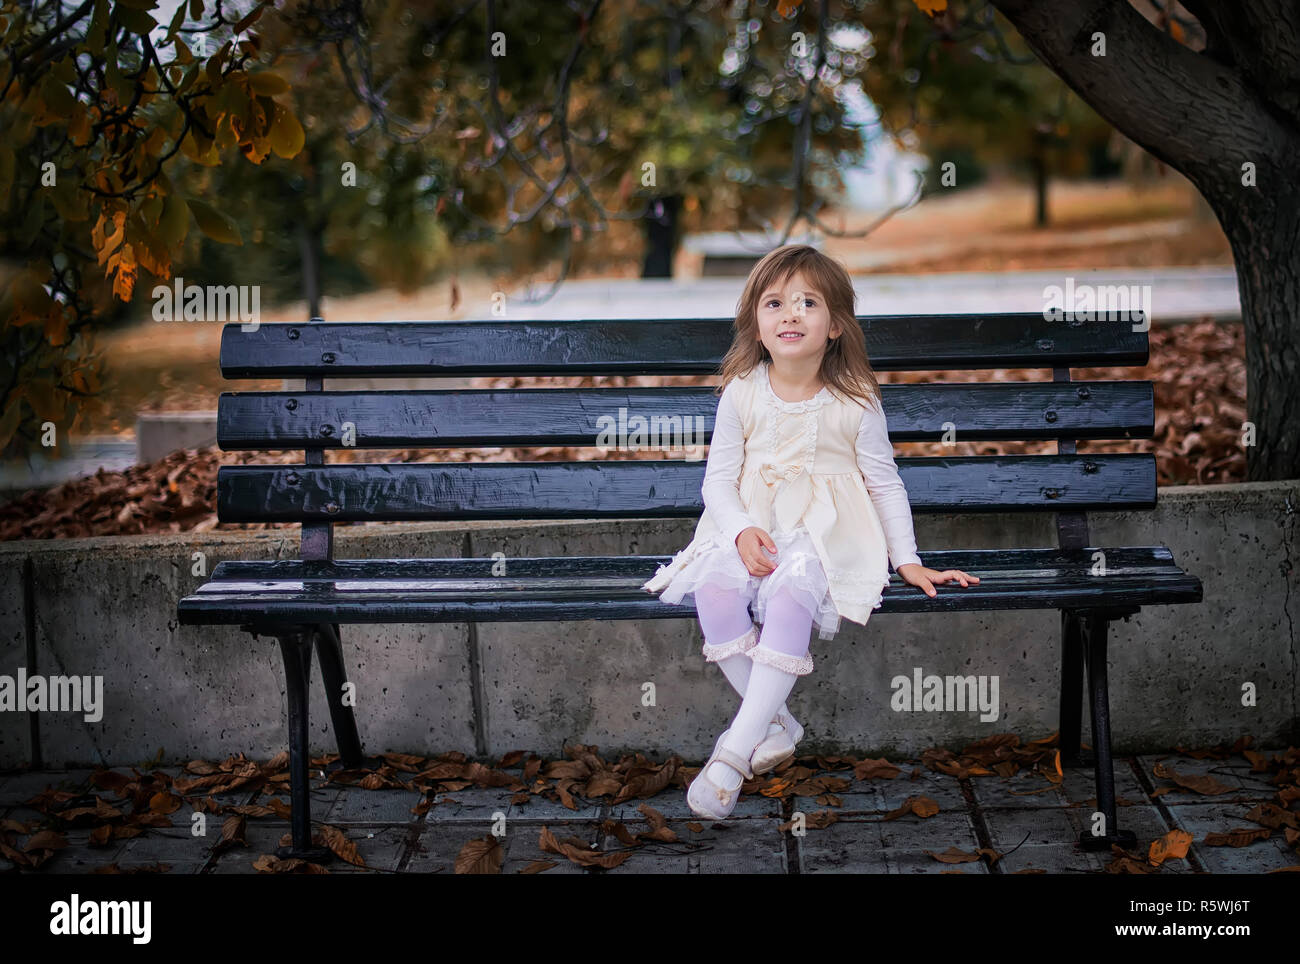 Girl sitting on a bench in the park, Bulgaria Stock Photo